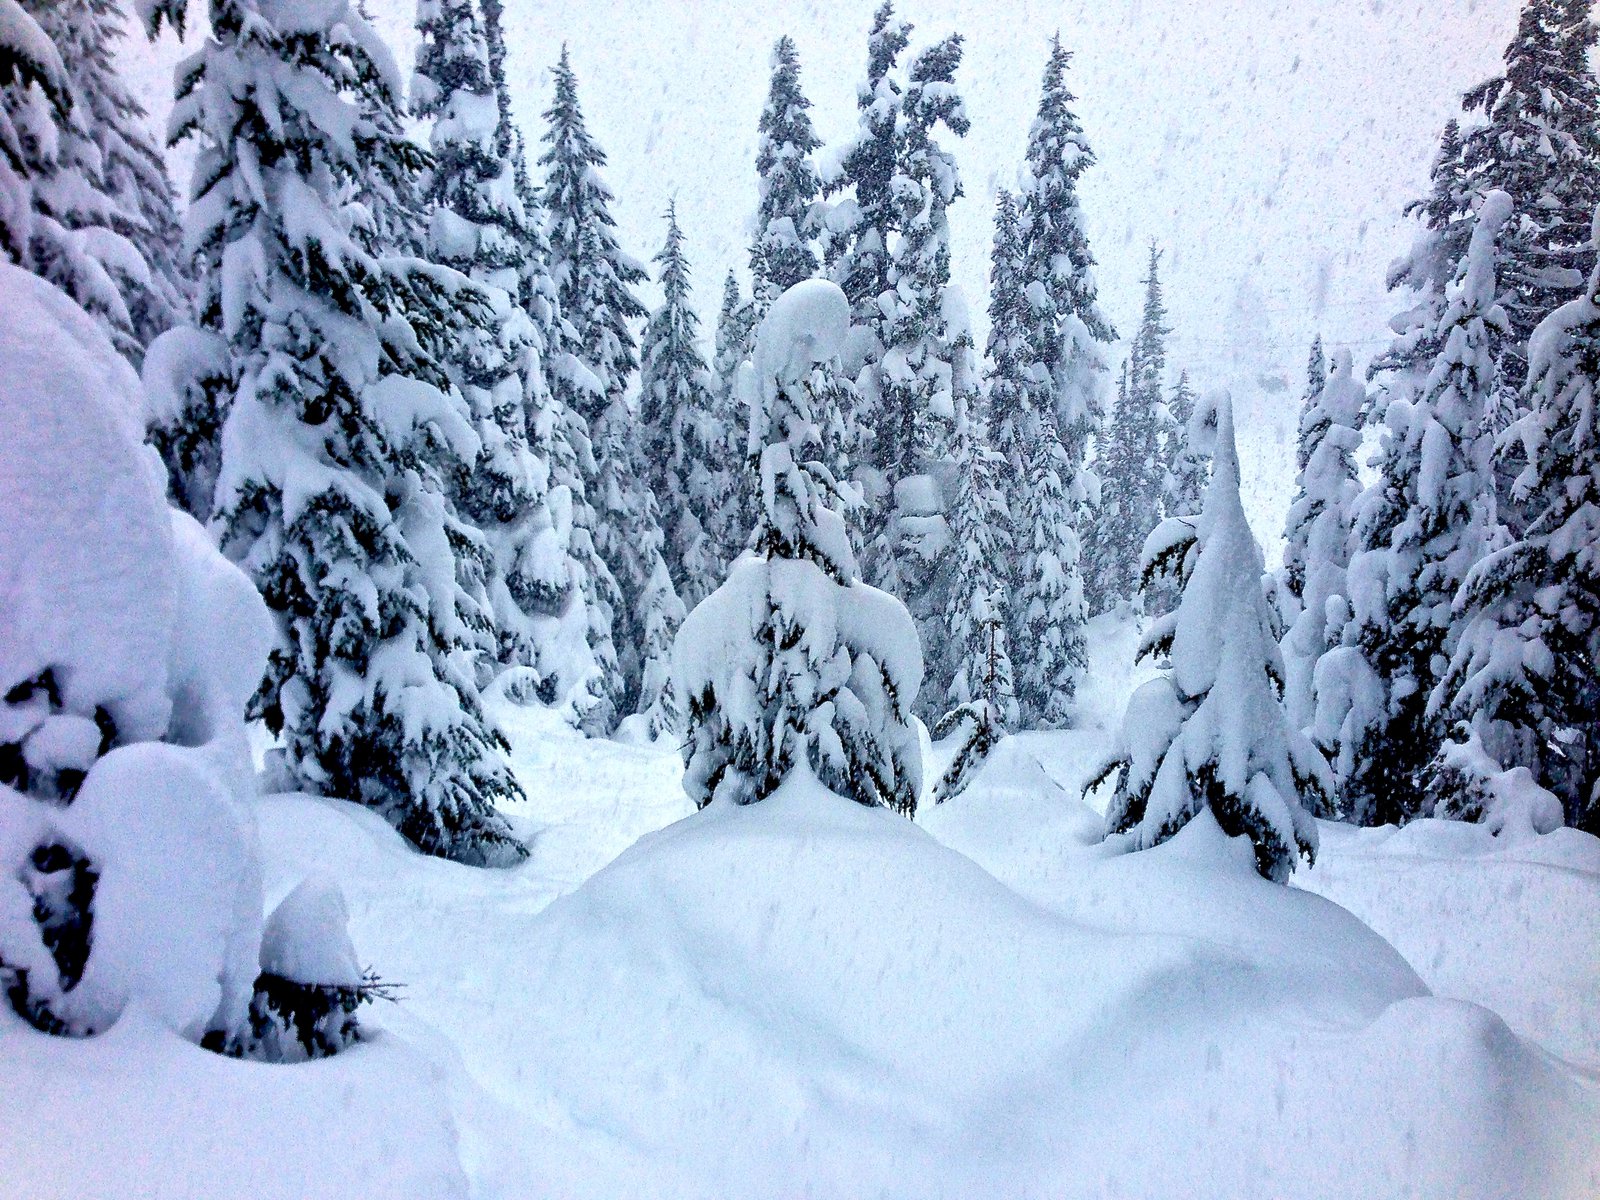 Trees and Powder